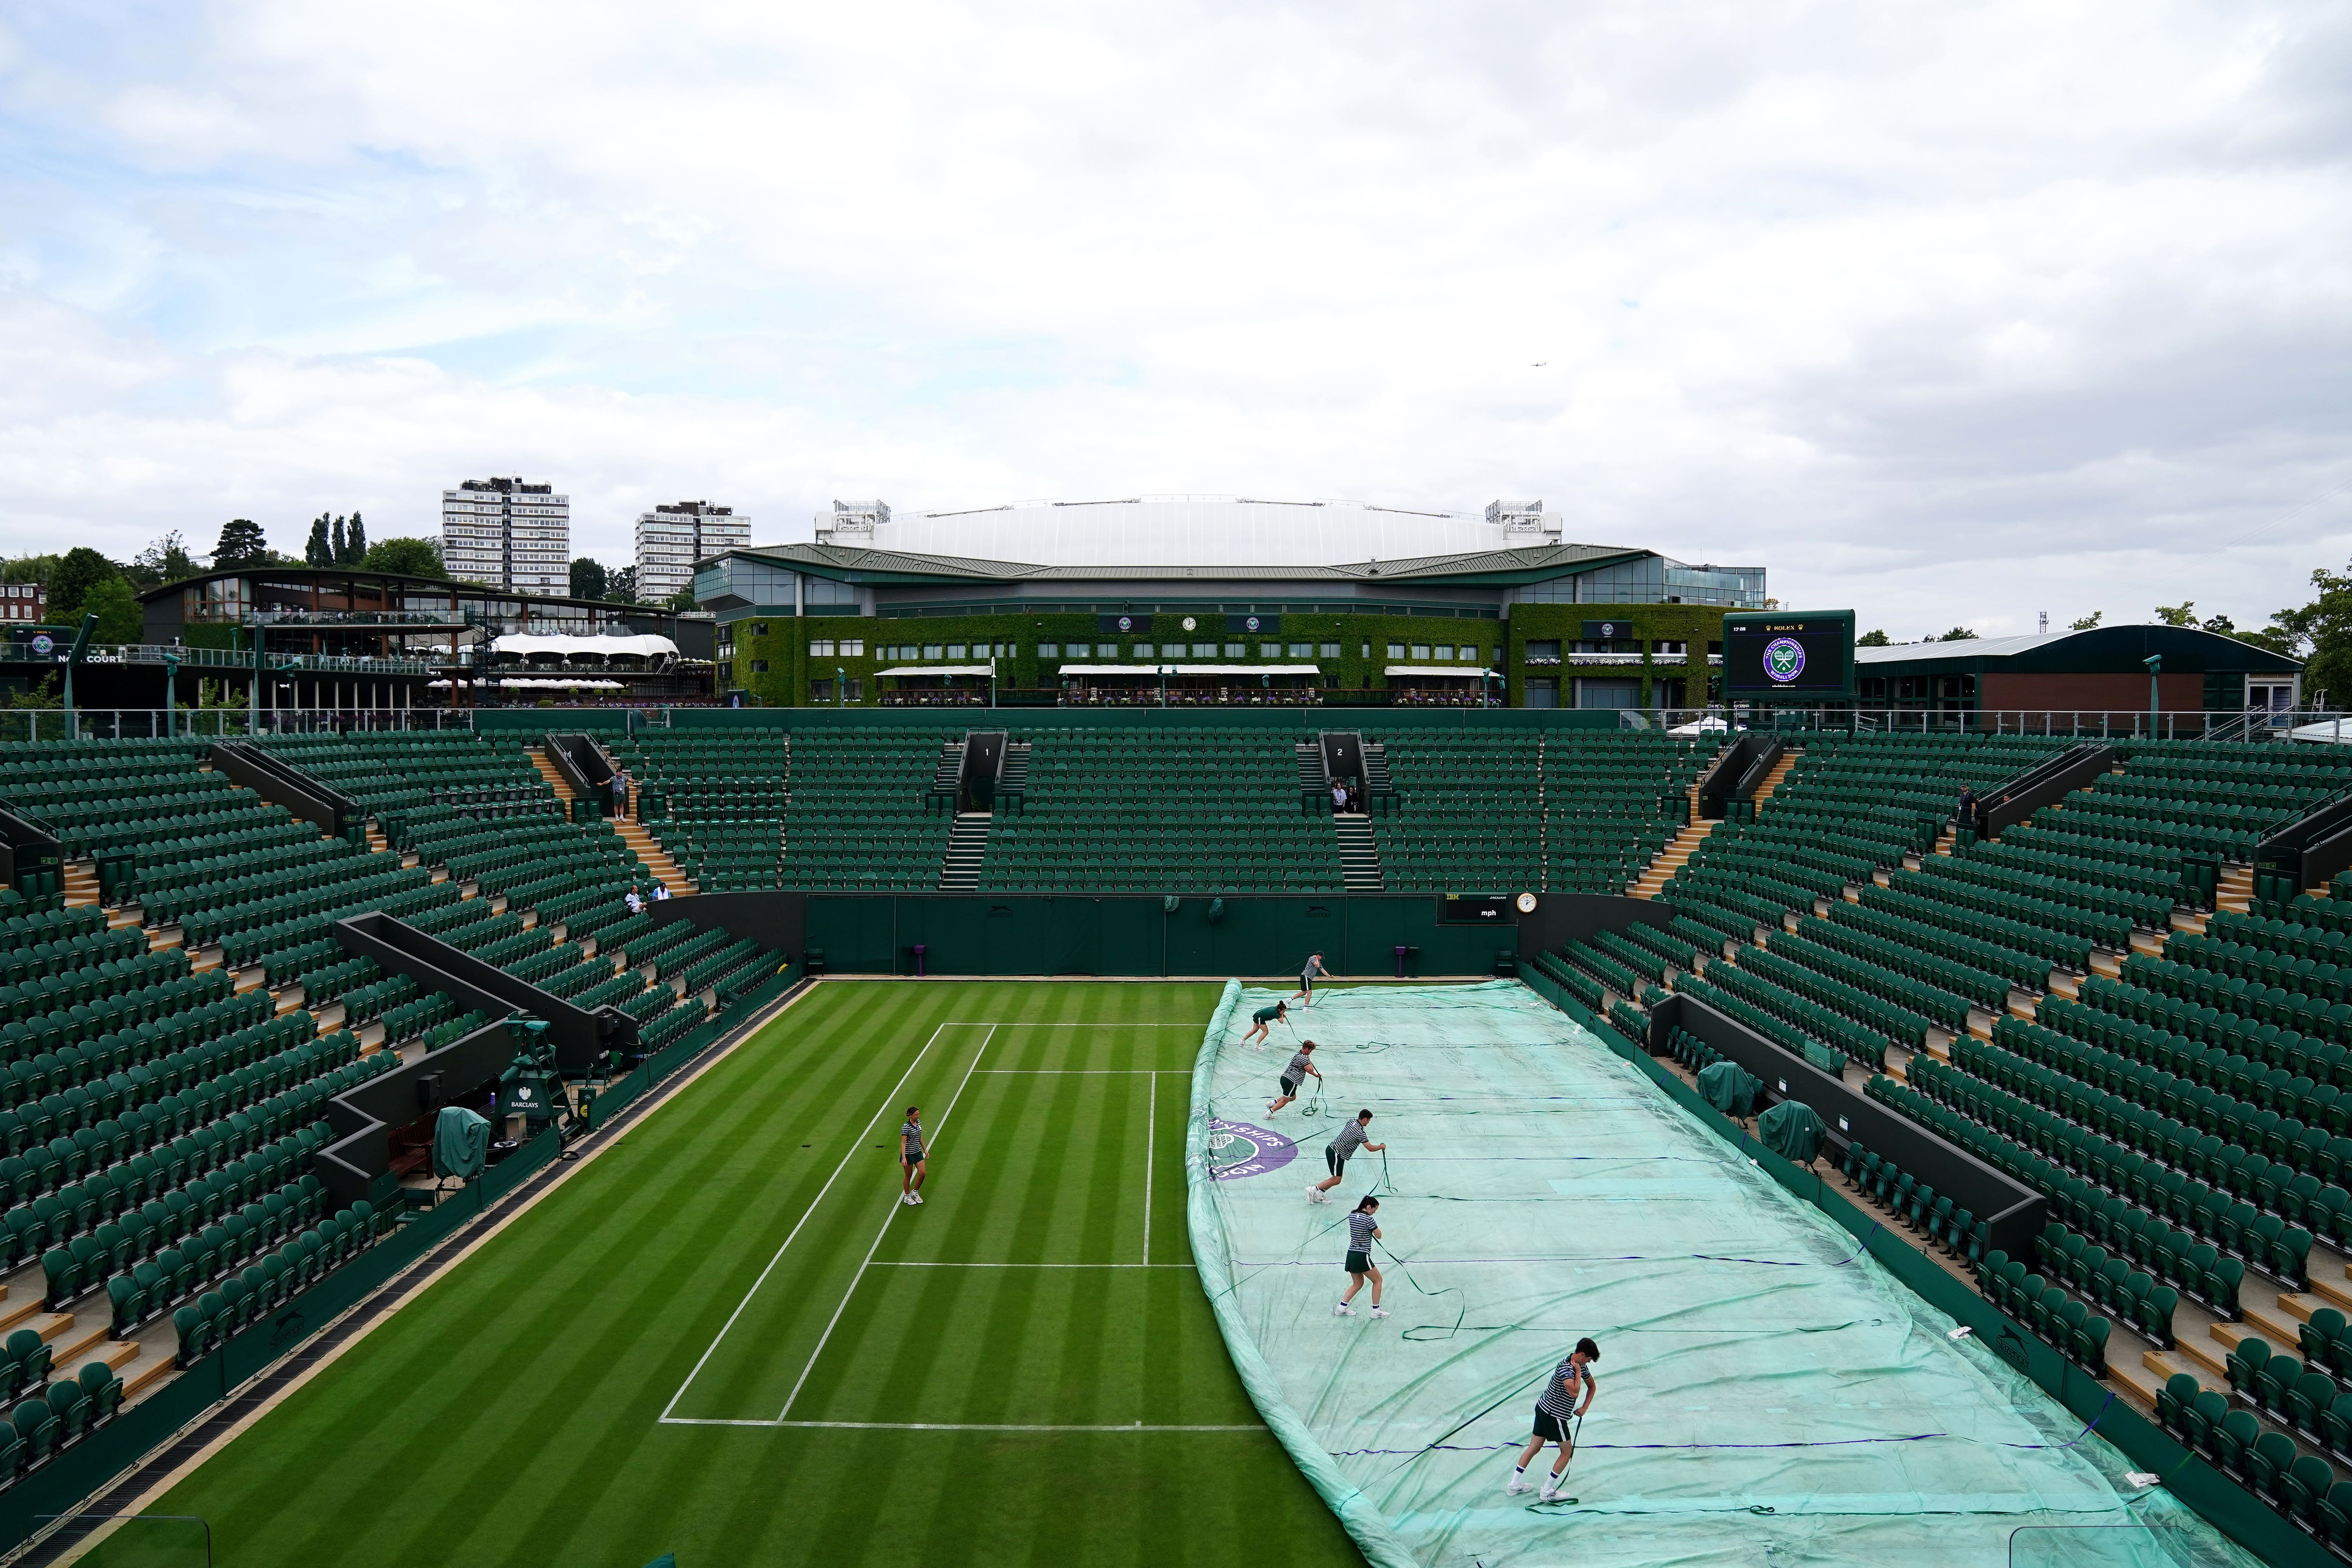 Tennis fans urged to pack umbrellas as scattered showers expected at Wimbledon The Independent